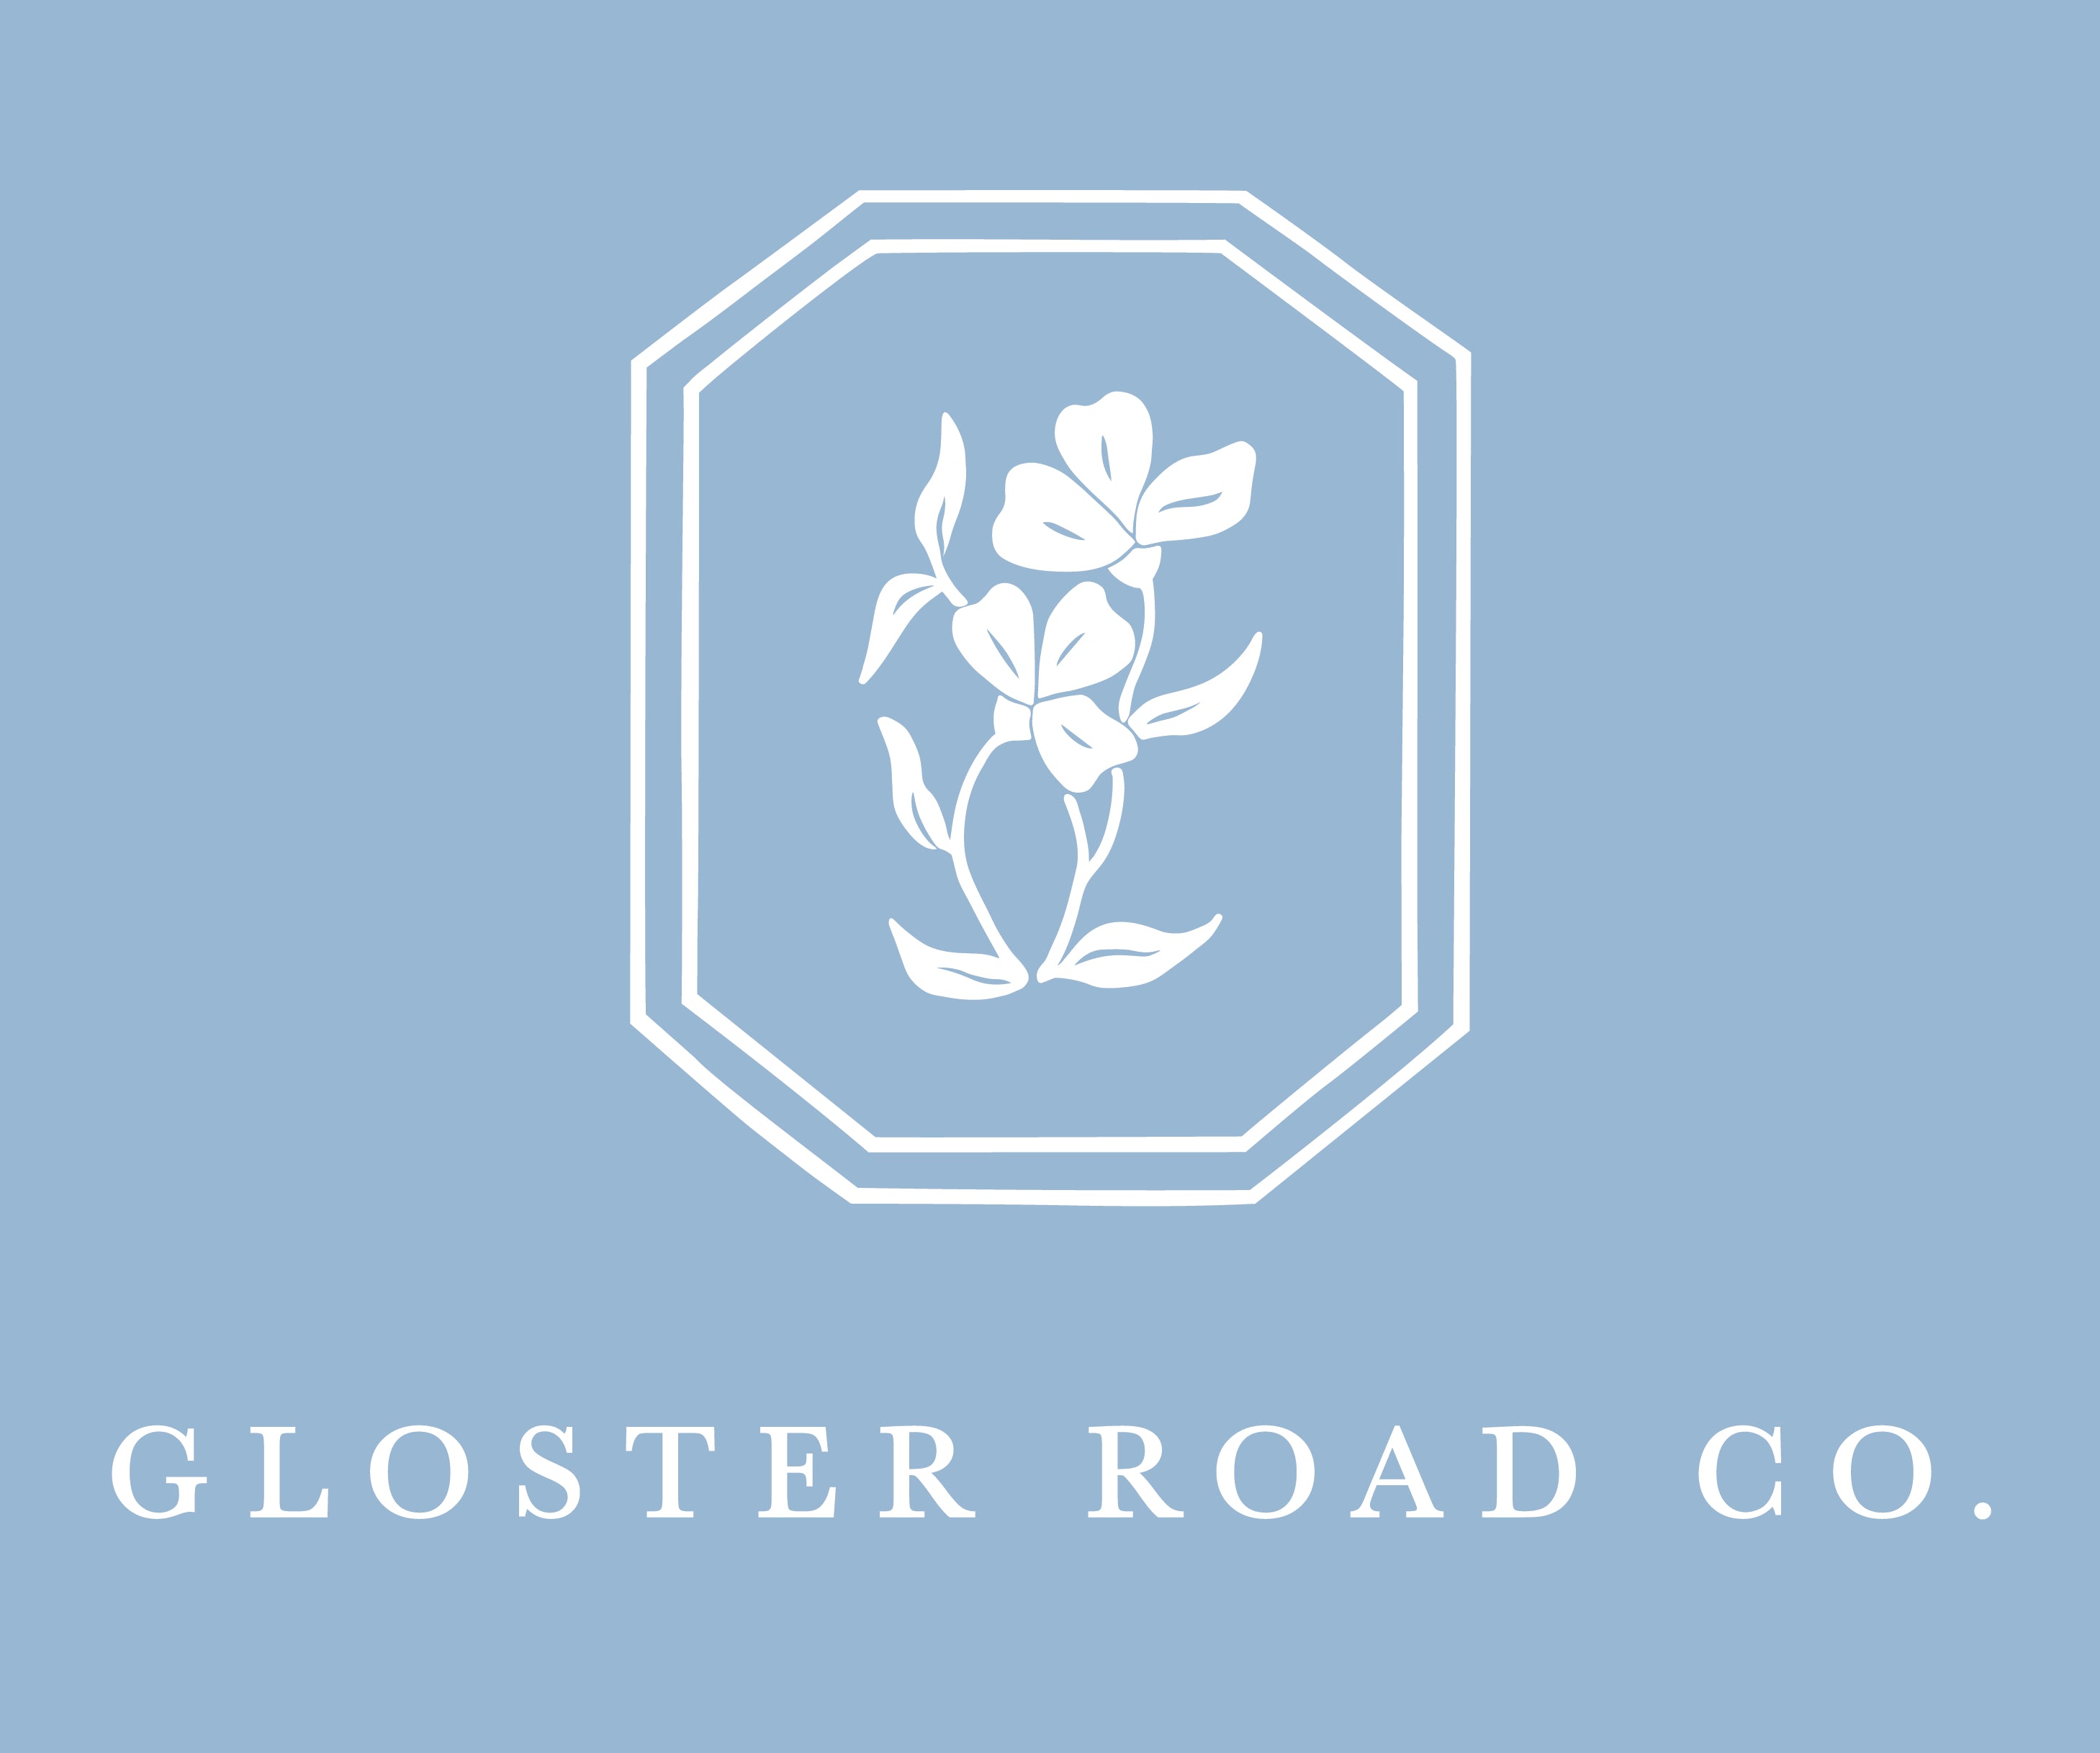 Gloster Road Co